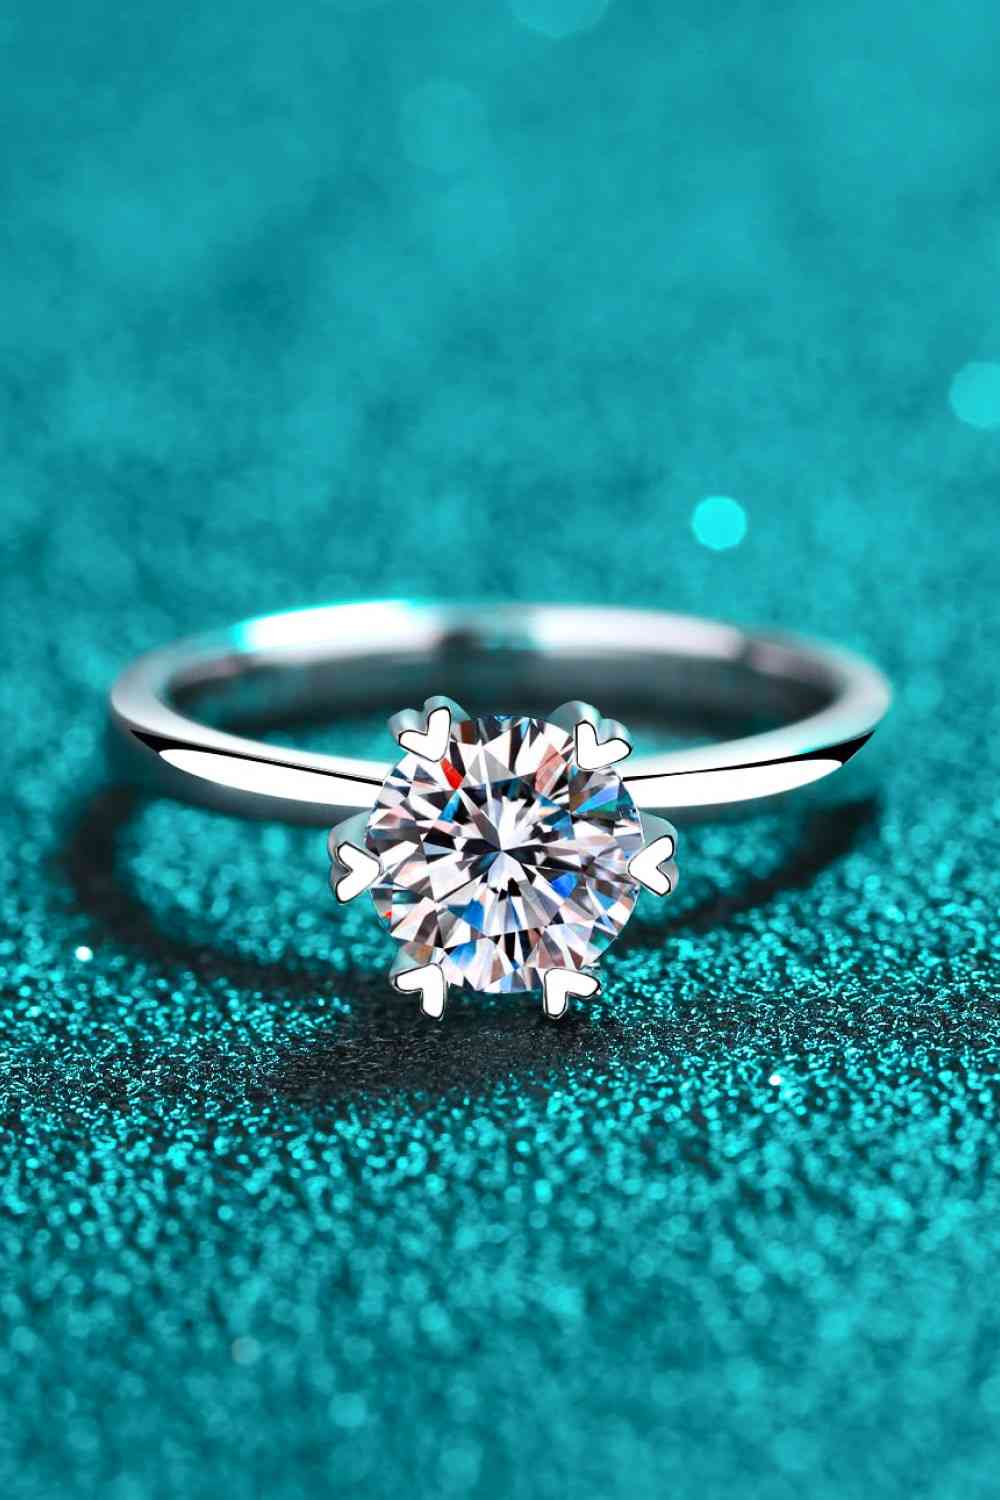 Pleasant Surprise 925 Sterling Silver 1 Carat Moissanite Ring - lolaluxeshop